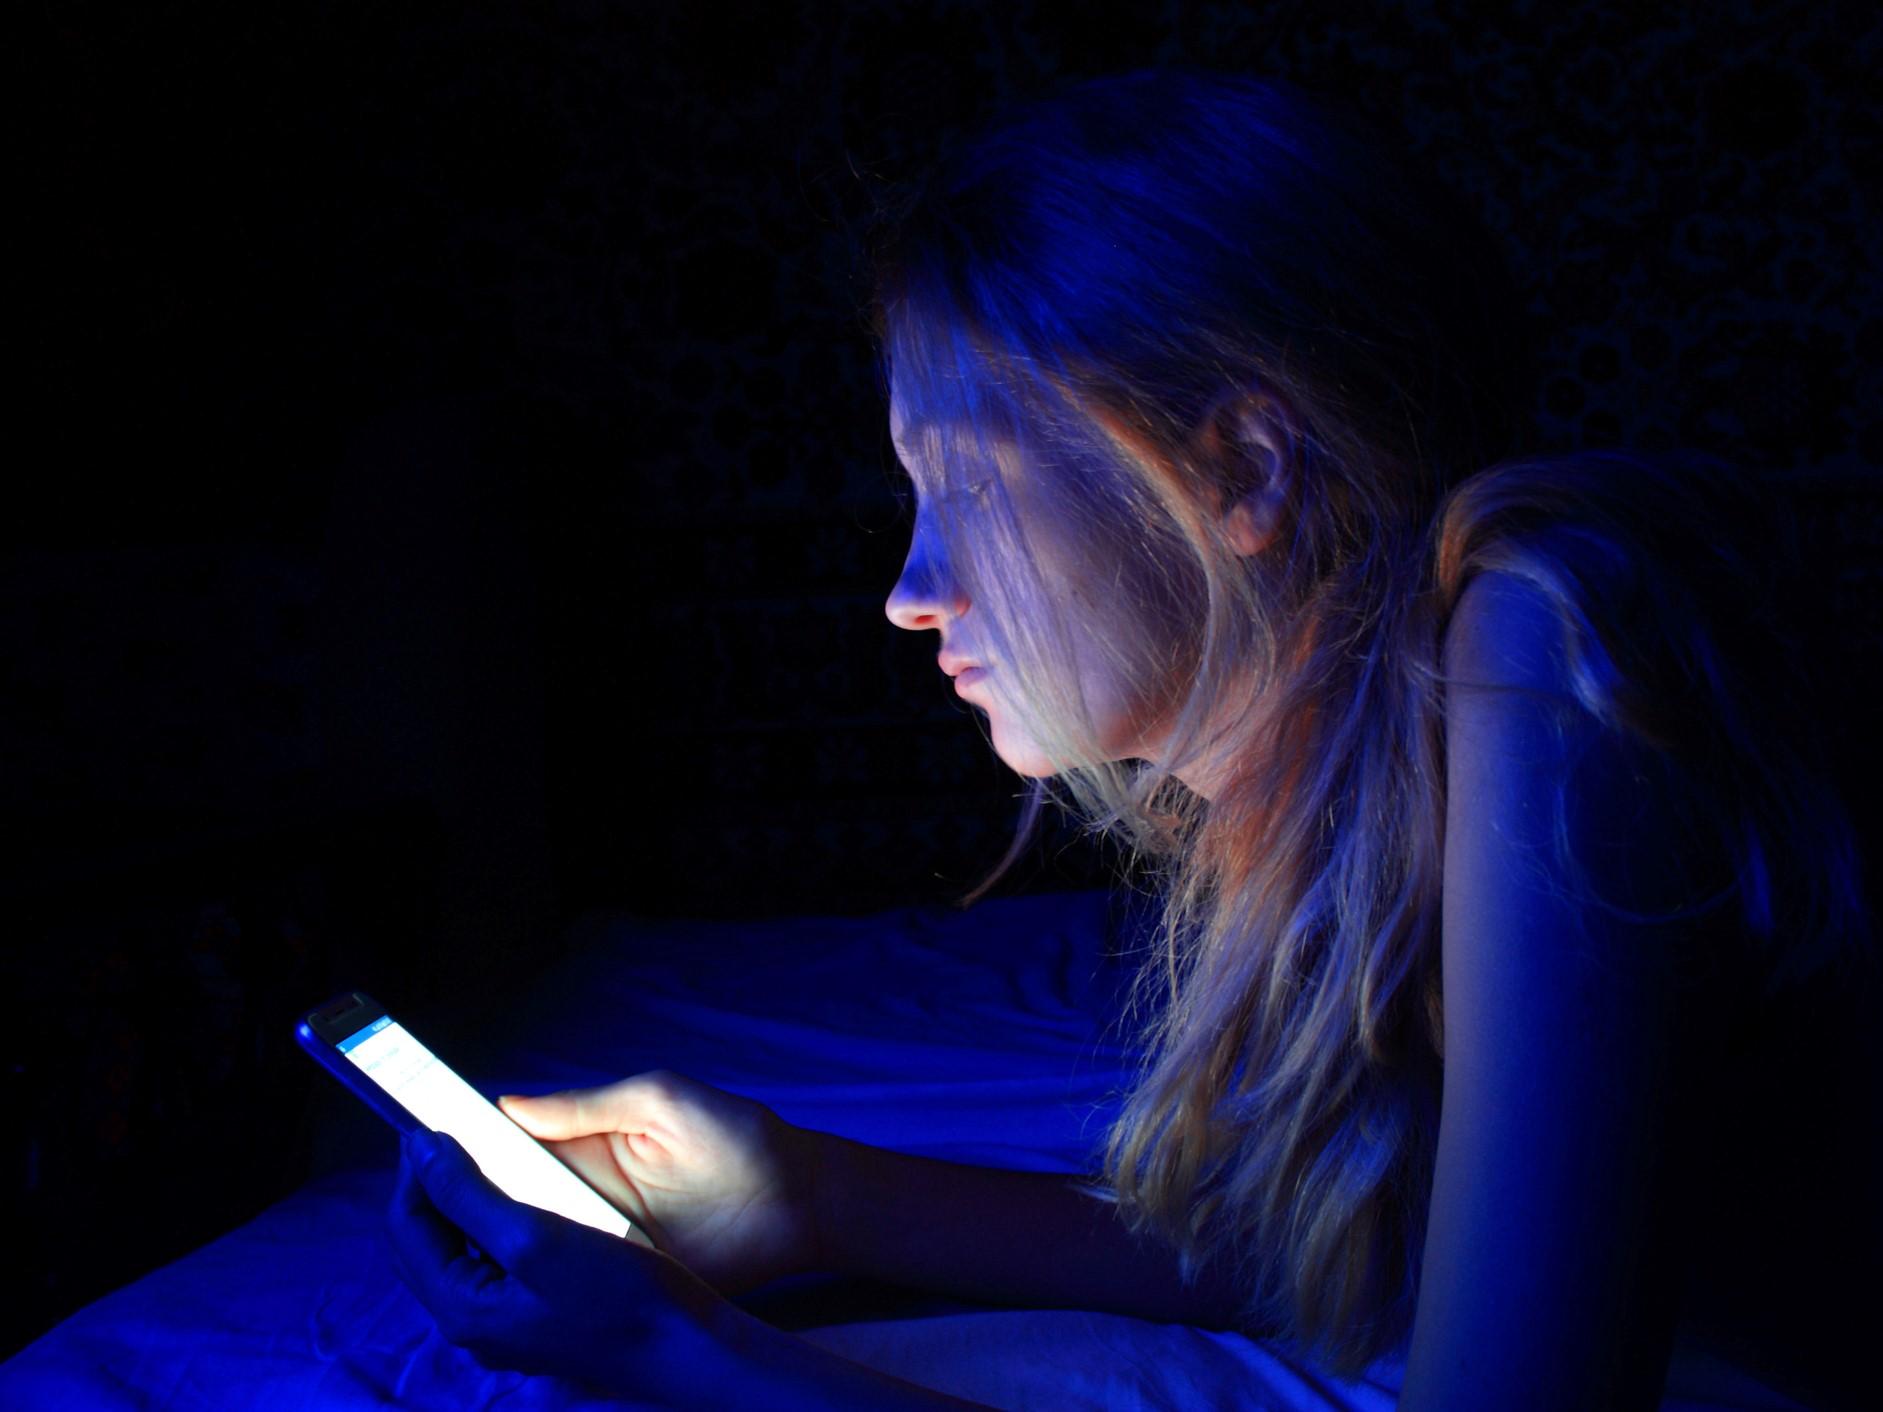 Staring at your phone at night could be linked to depression, study | The Independent The Independent